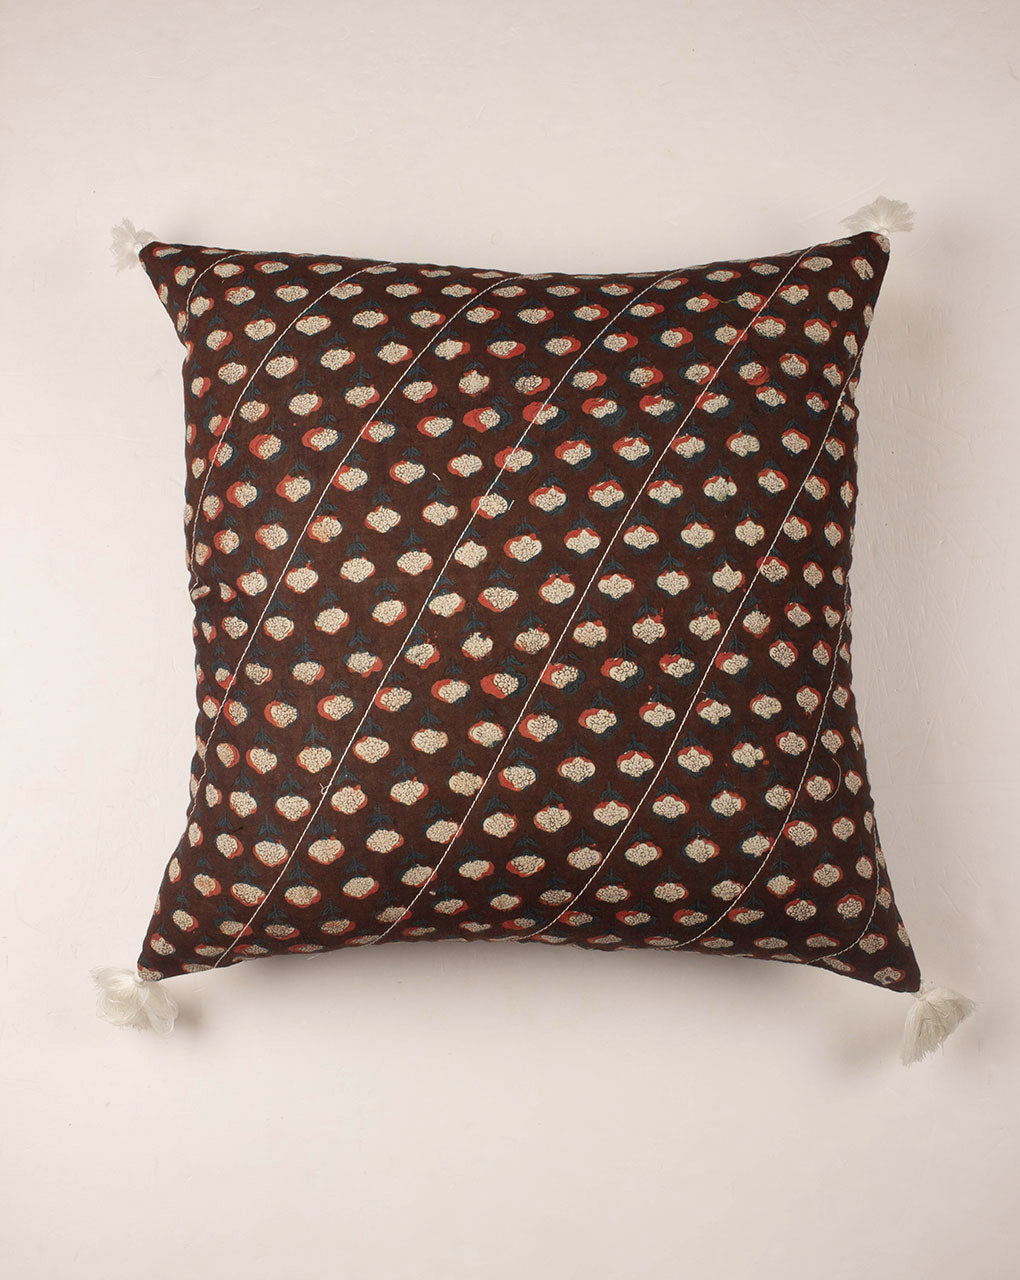 Hand Crafted DabuCotton Cushion Cover ( 18X18 Inches ) - Fabriclore.com